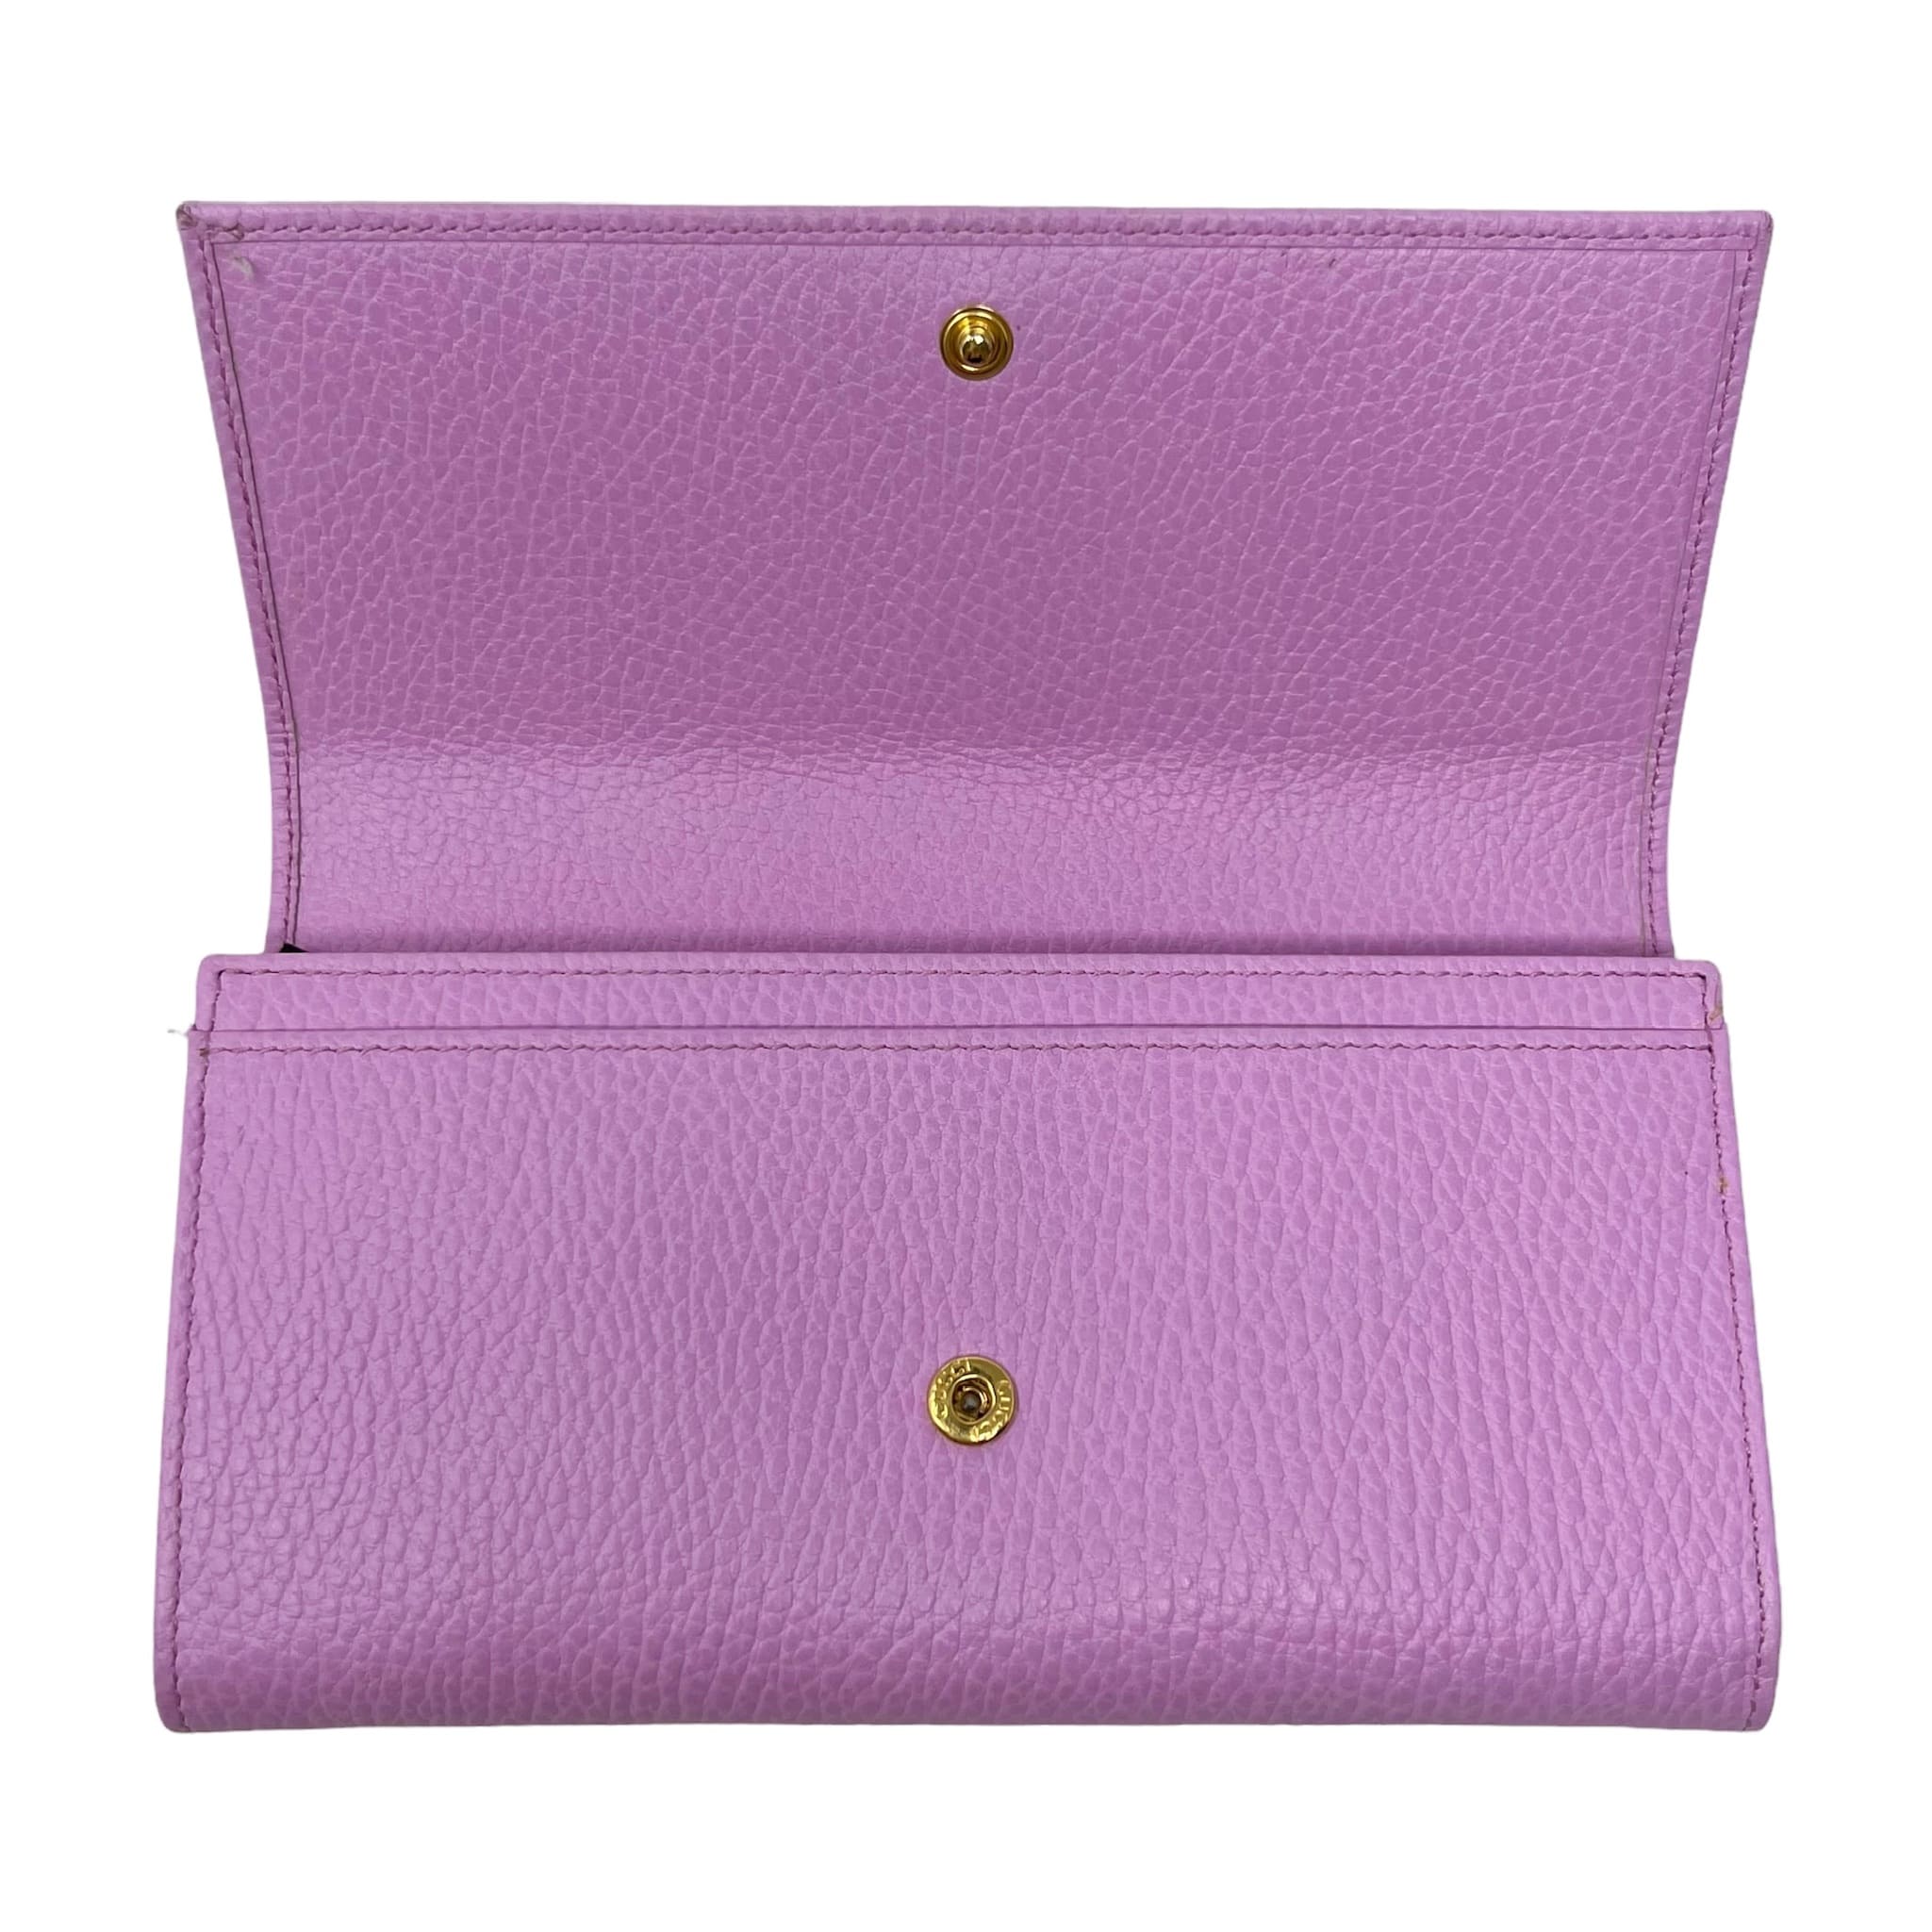 Gucci Pink Bosco Long Marmont Wallet